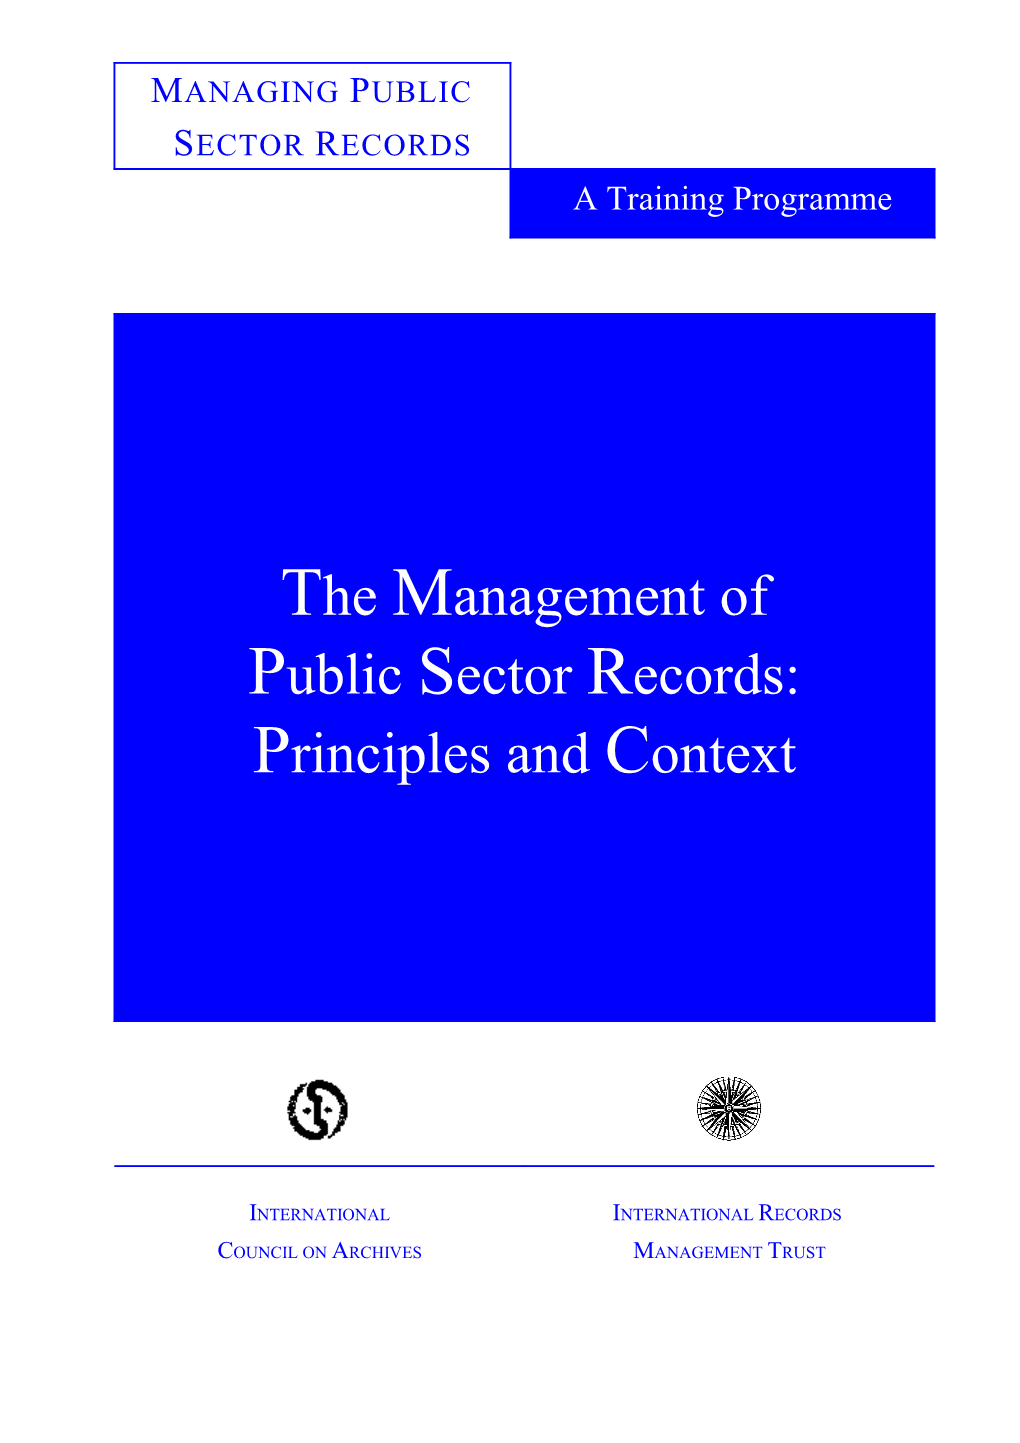 The Management of Public Sector Records: Principles and Context